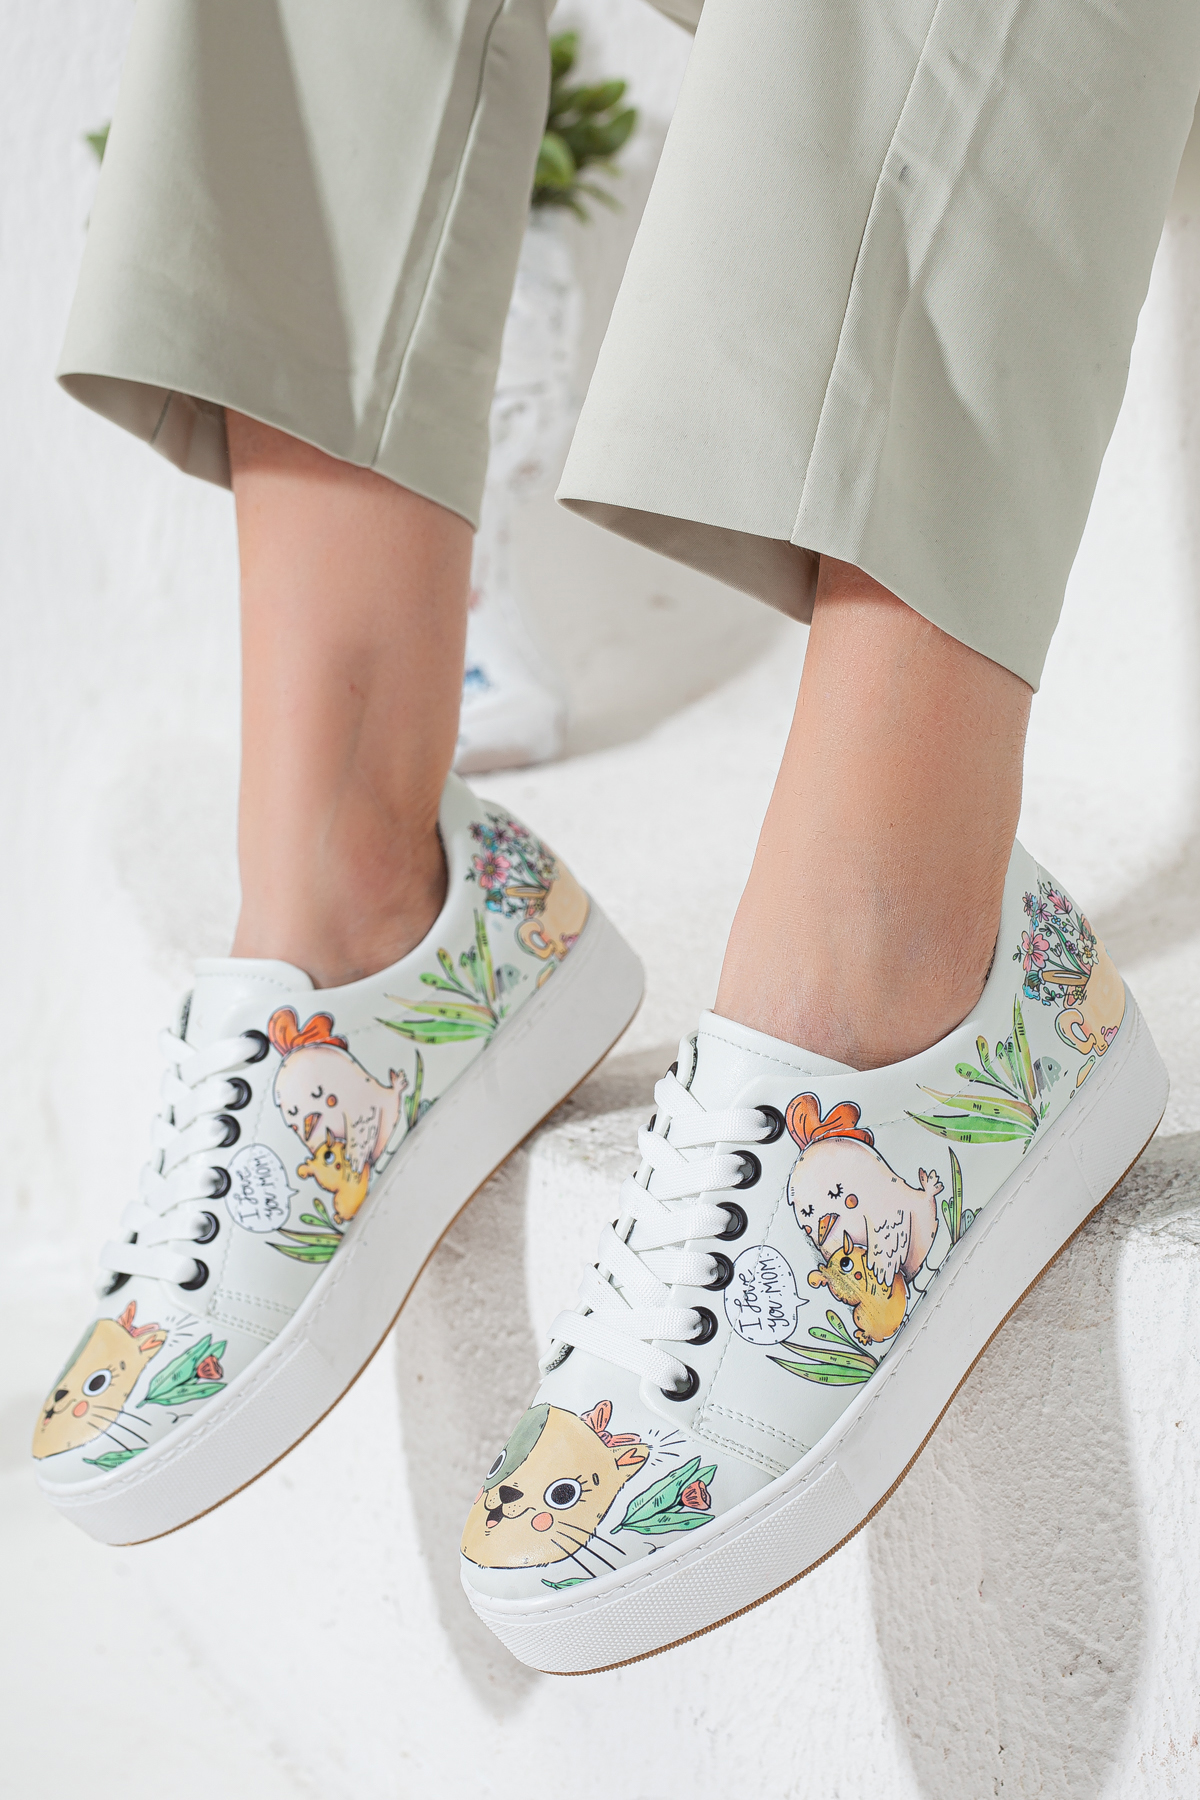 MOM CAT DESIGN SNEAKERS SHOES